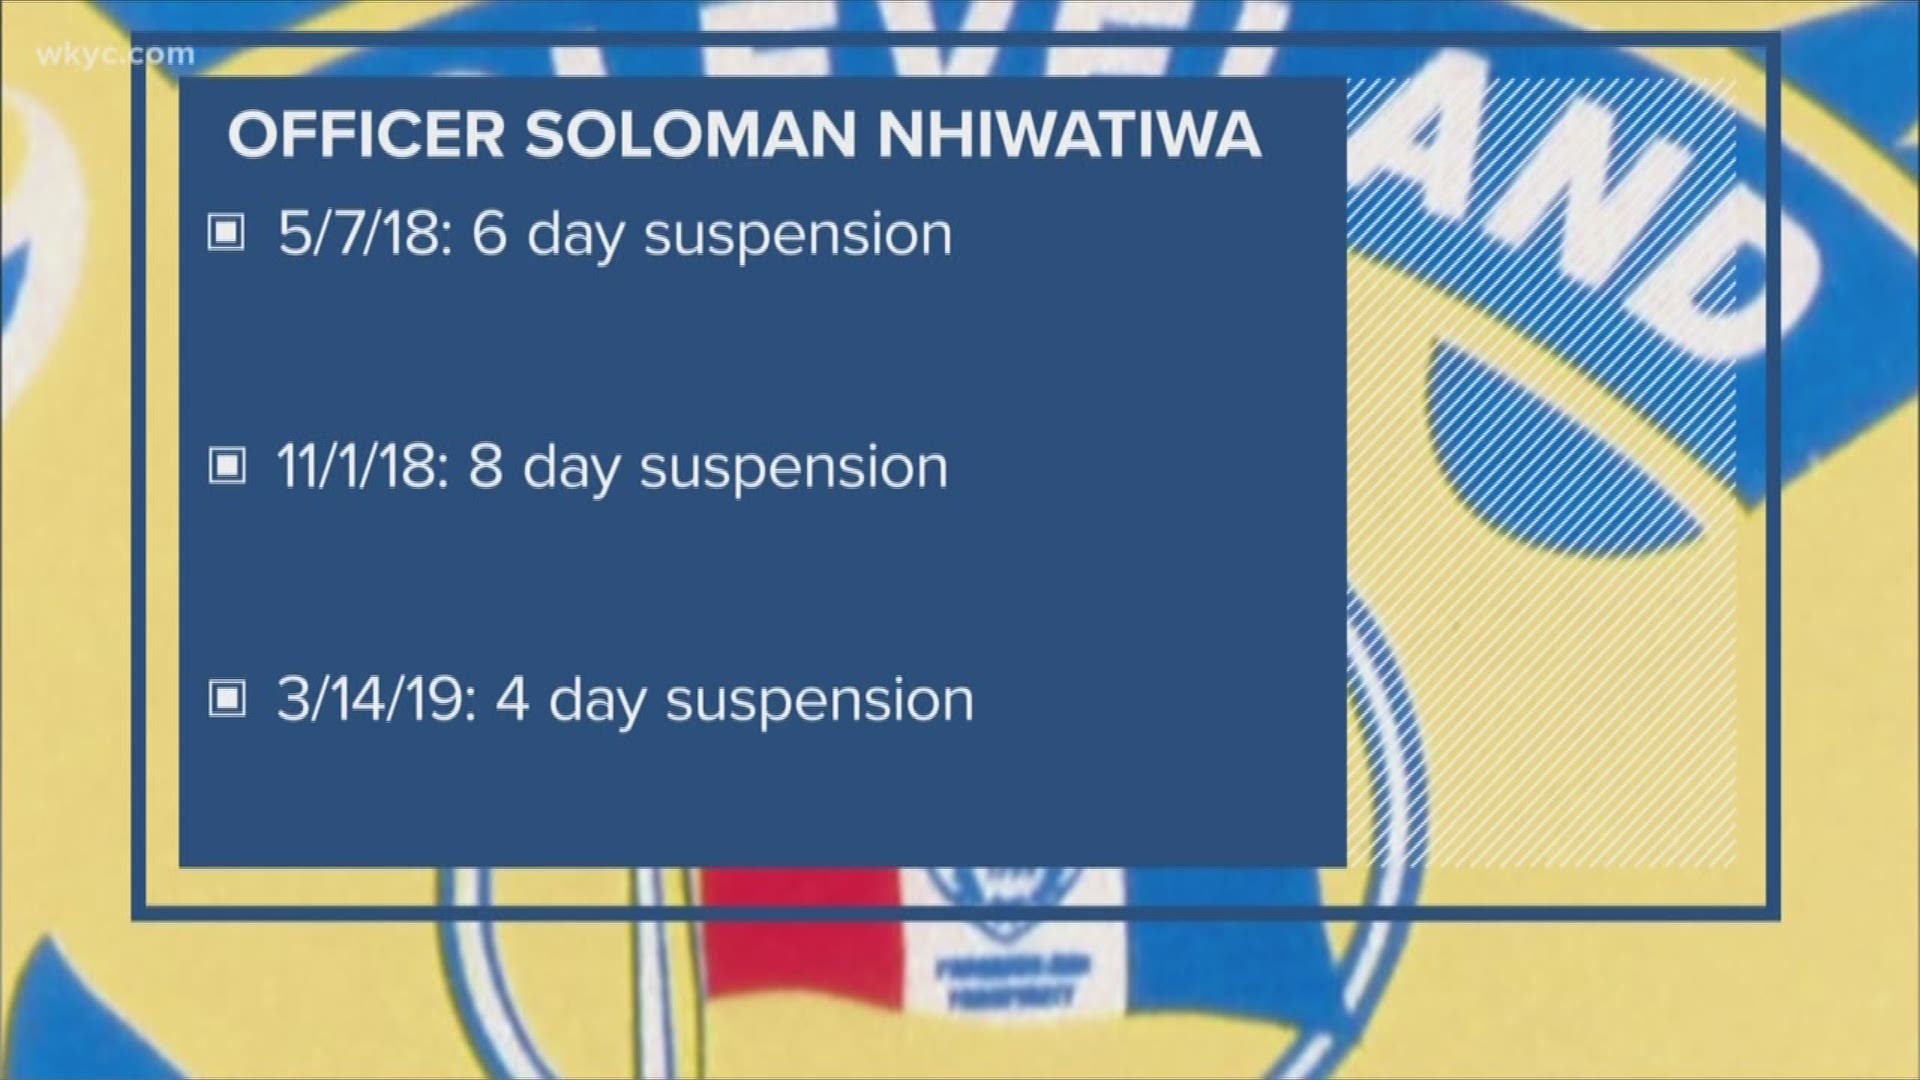 Solomon Nhiwatiwa, a five-year veteran of the Cleveland Division of Police, is currently suspended without pay. He faces eight criminal charges, including attempted kidnapping with a sexual motivation specification.